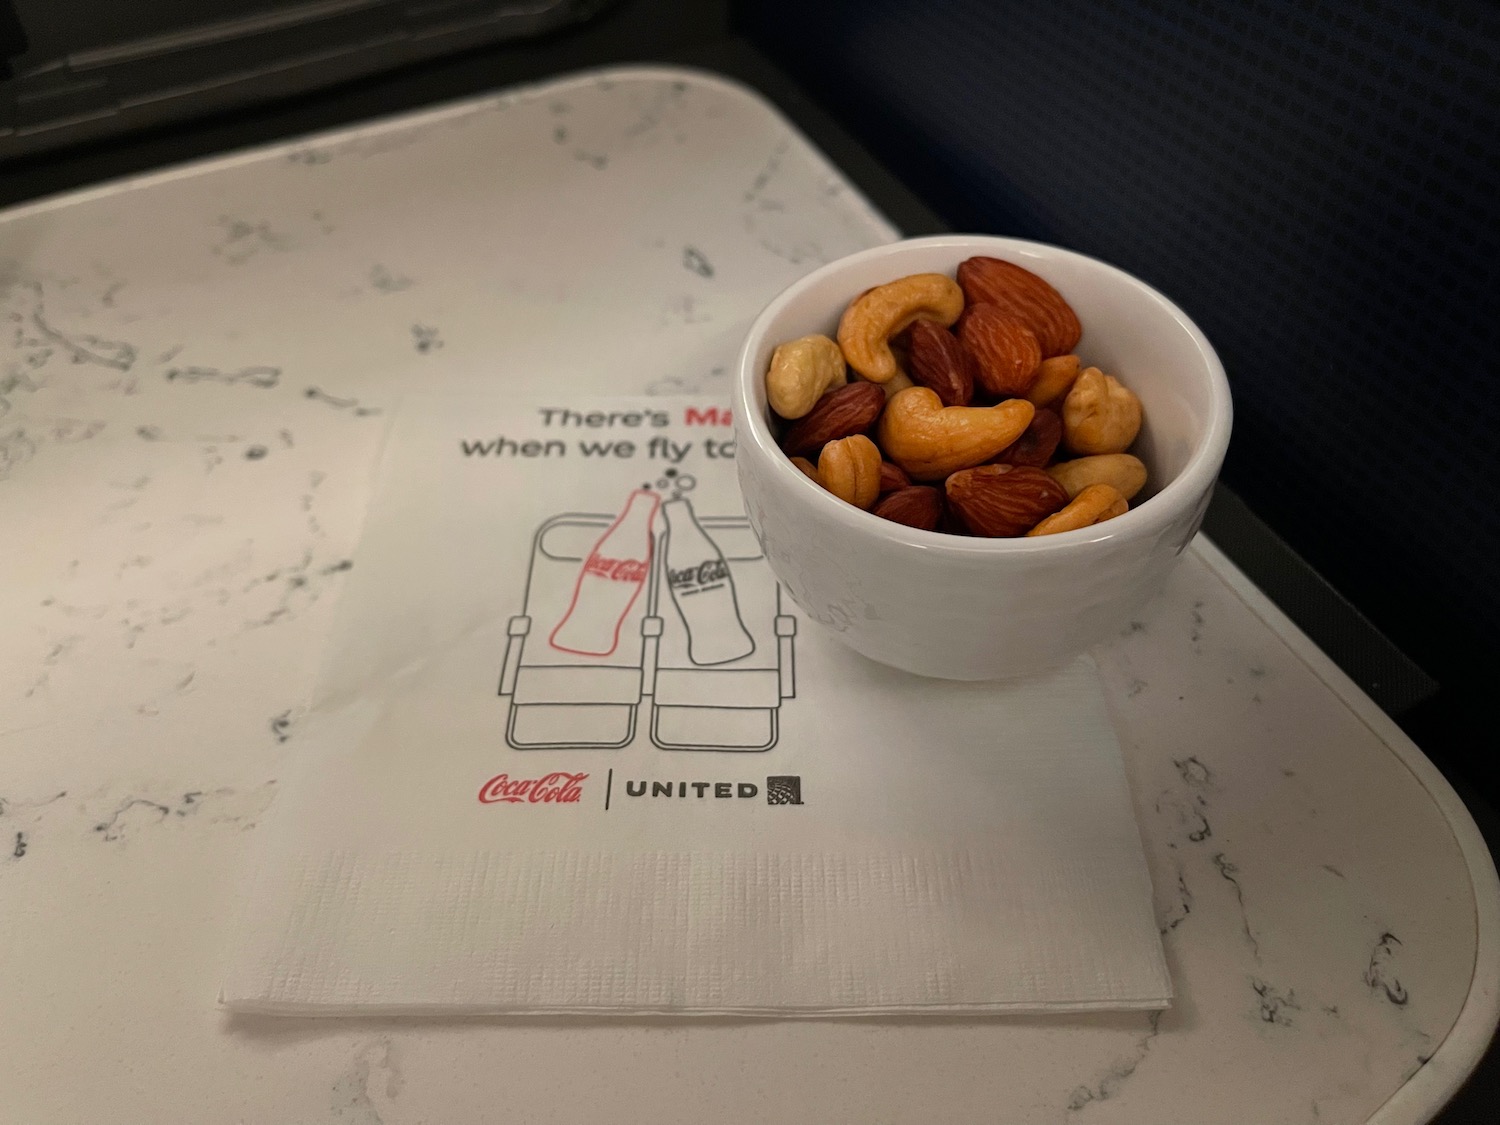 a bowl of nuts on a napkin